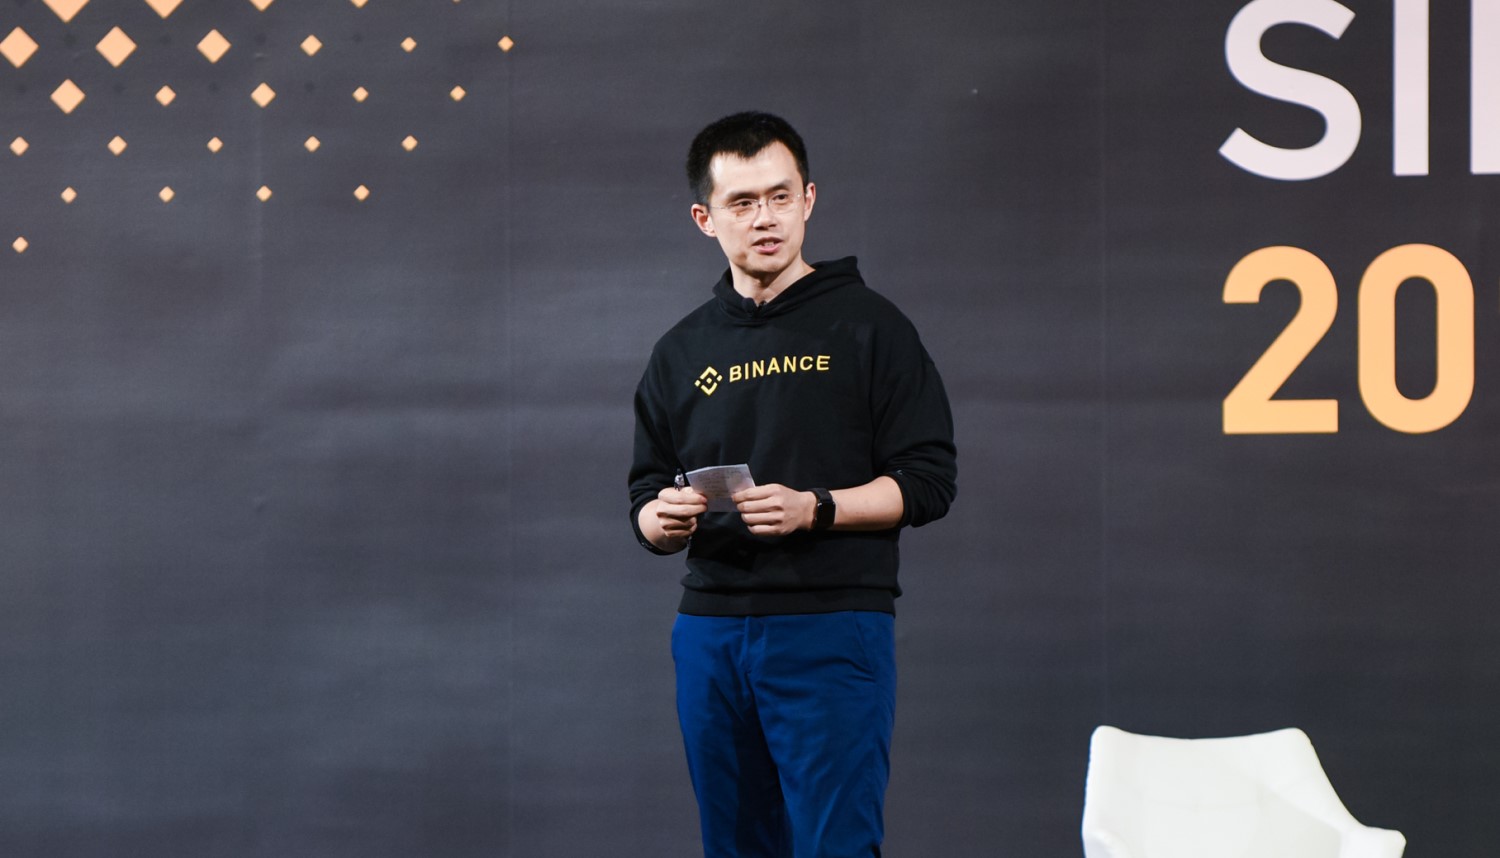 Binance’s-new-uk-exchange-to-provide-institutions-with-regulated-access-to-crypto